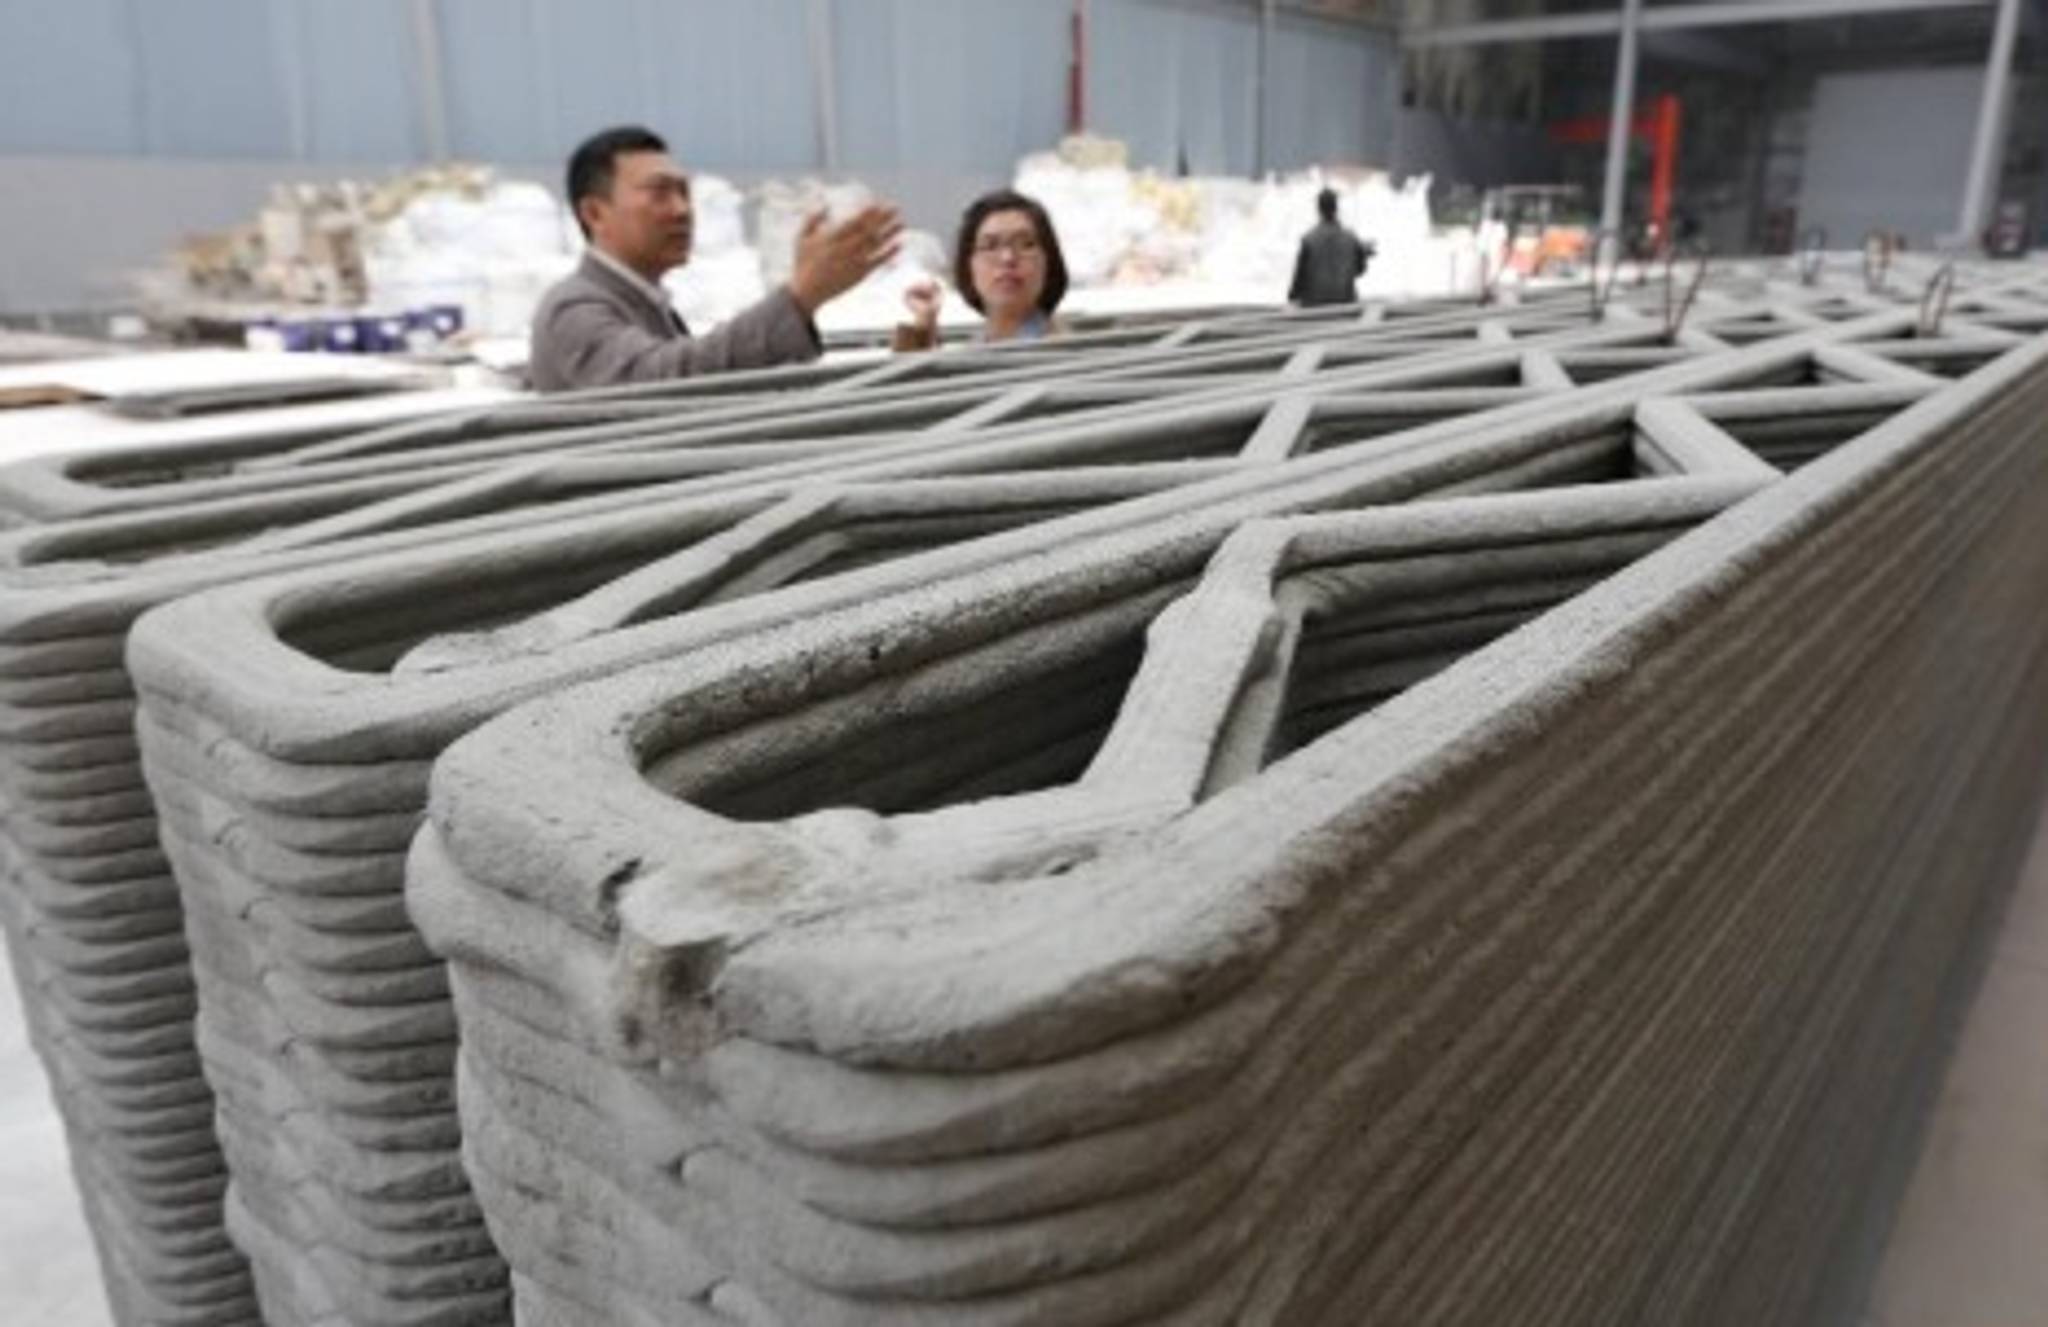 Do you want to live in a 3D printed house?